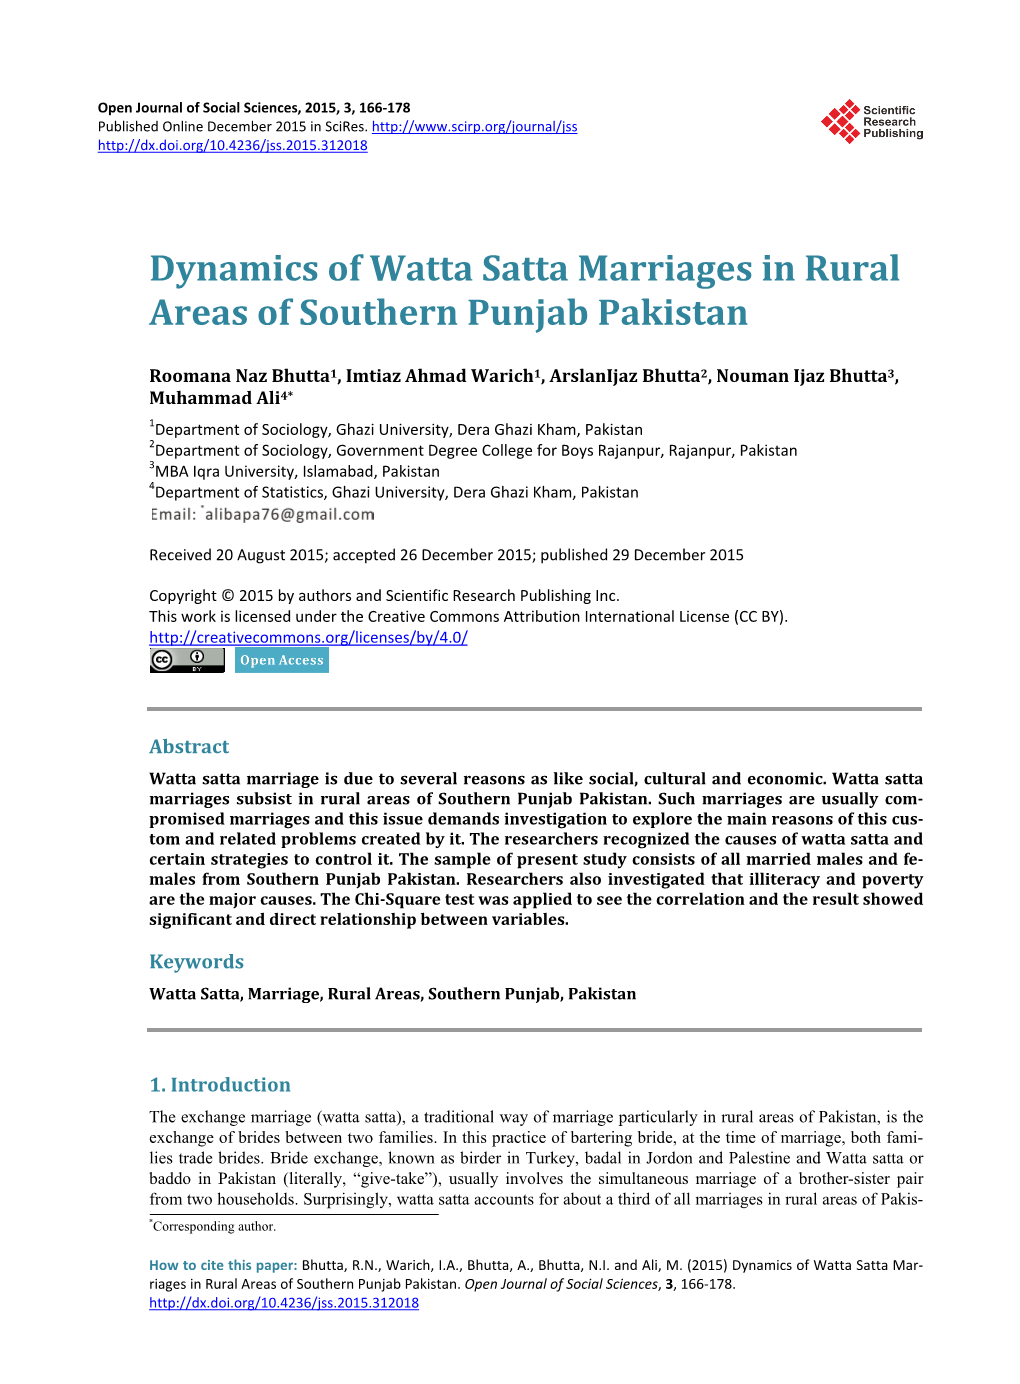 Dynamics of Watta Satta Marriages in Rural Areas of Southern Punjab Pakistan